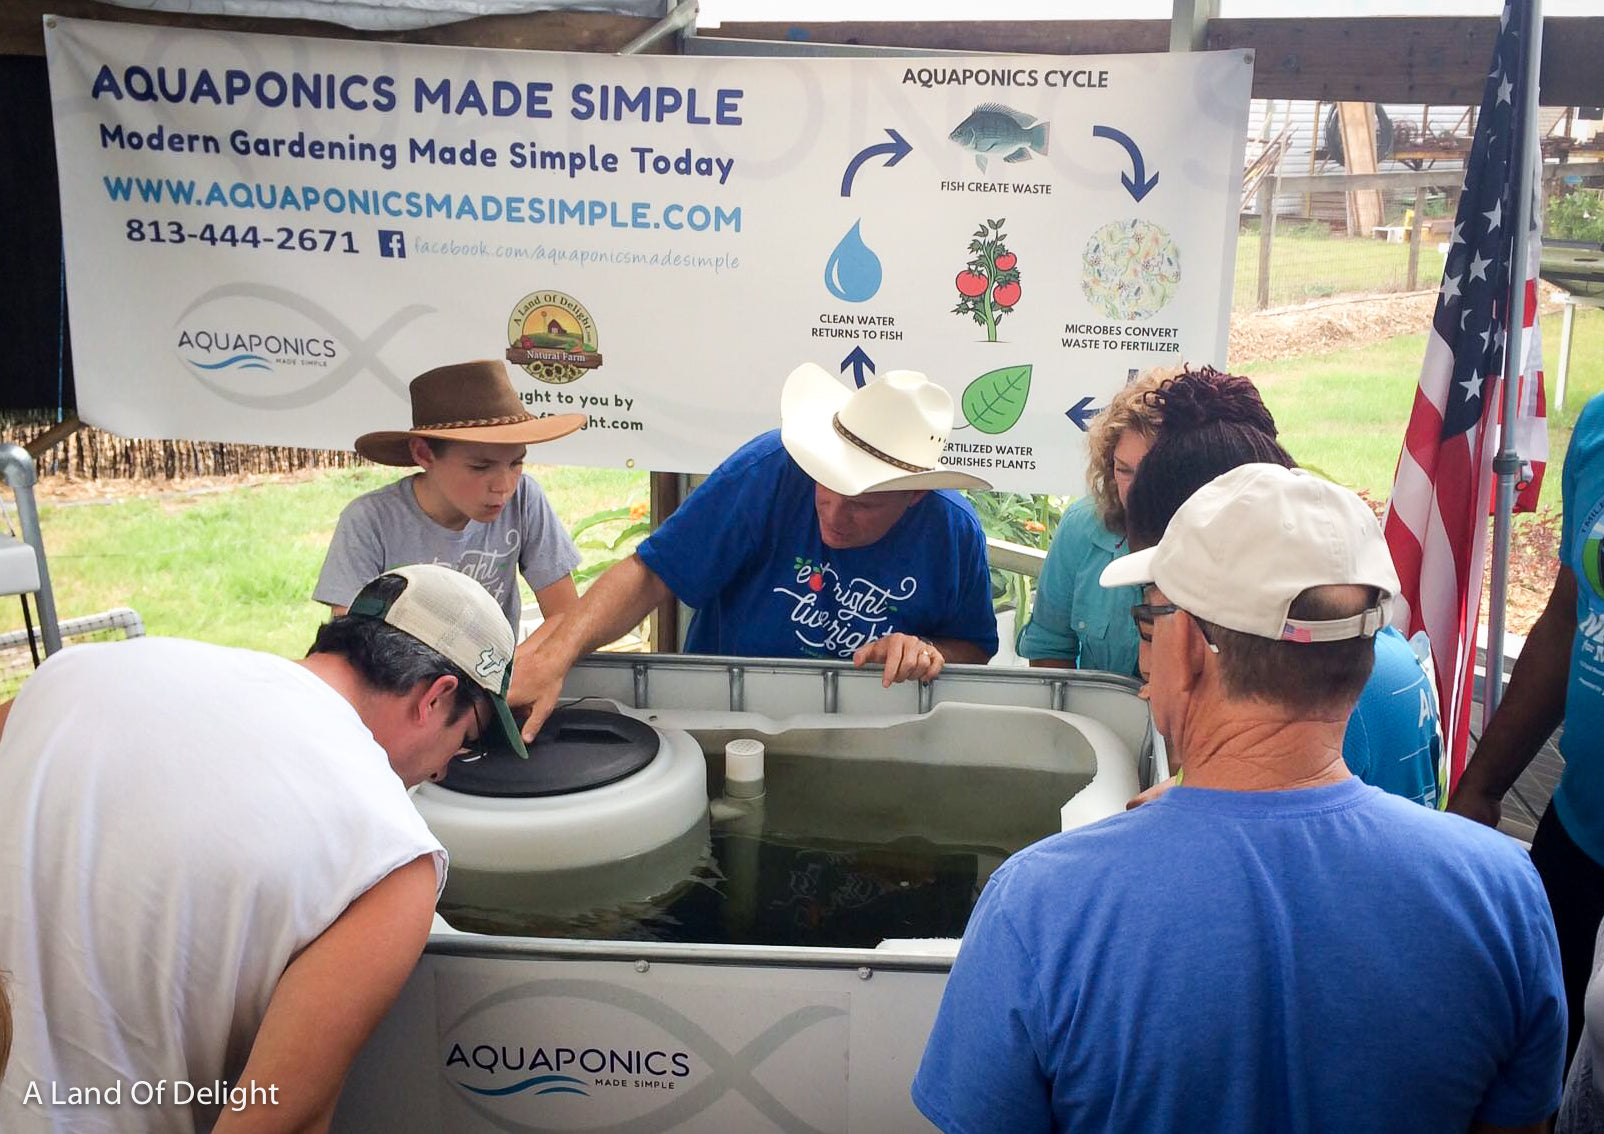 Dr. Eric Gonyon giving Aquaponics made simple class to group of people.